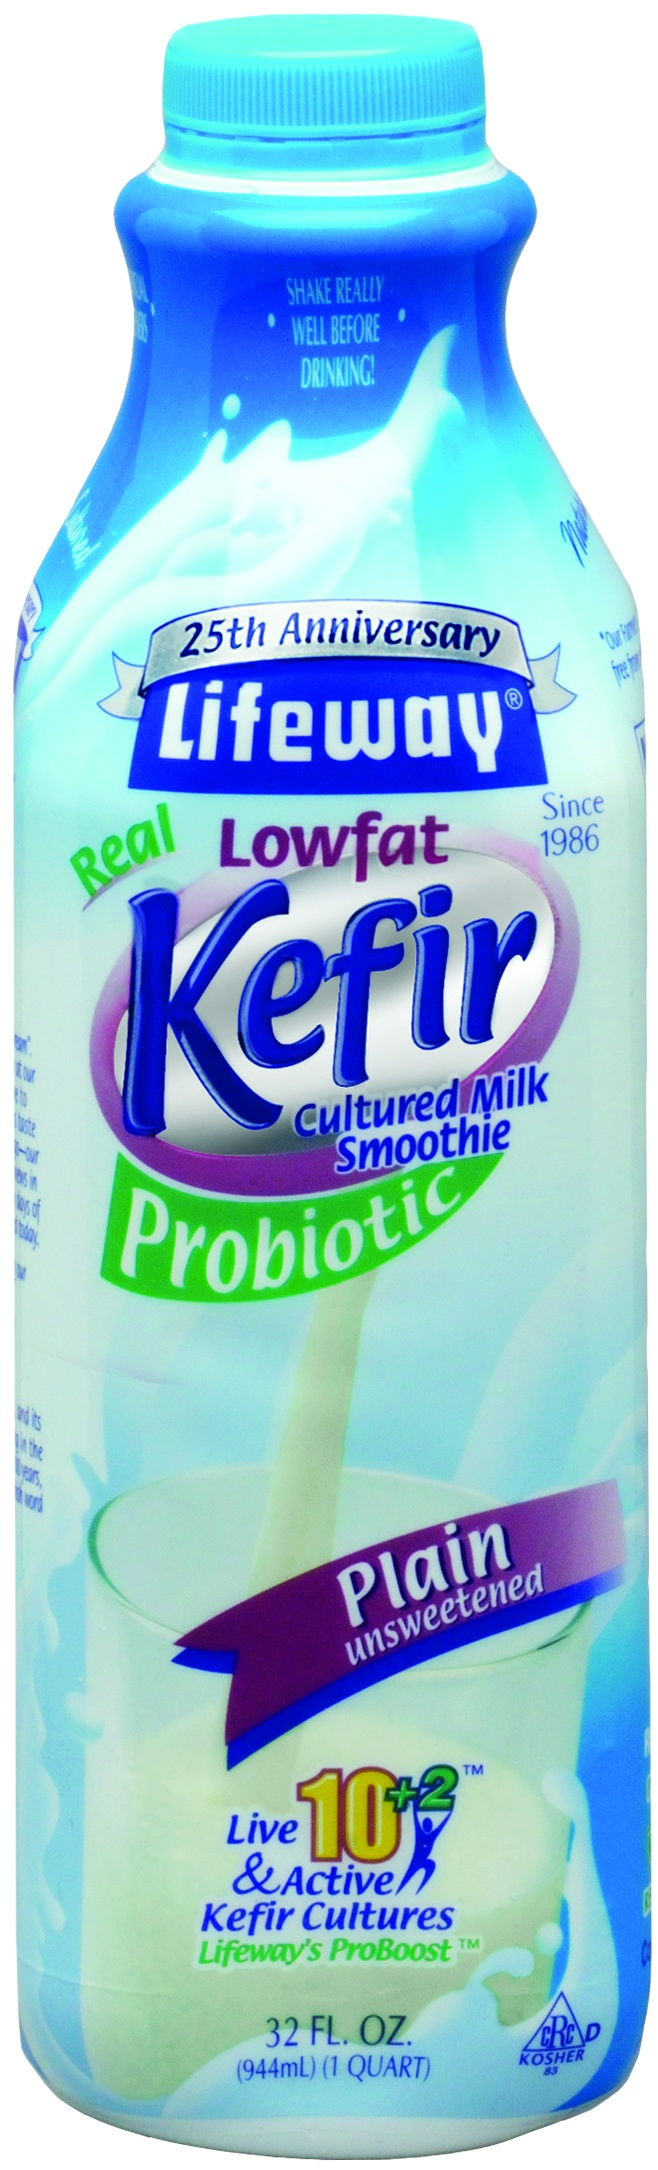 Kefir and what it's all about, Cultured Dairy drink